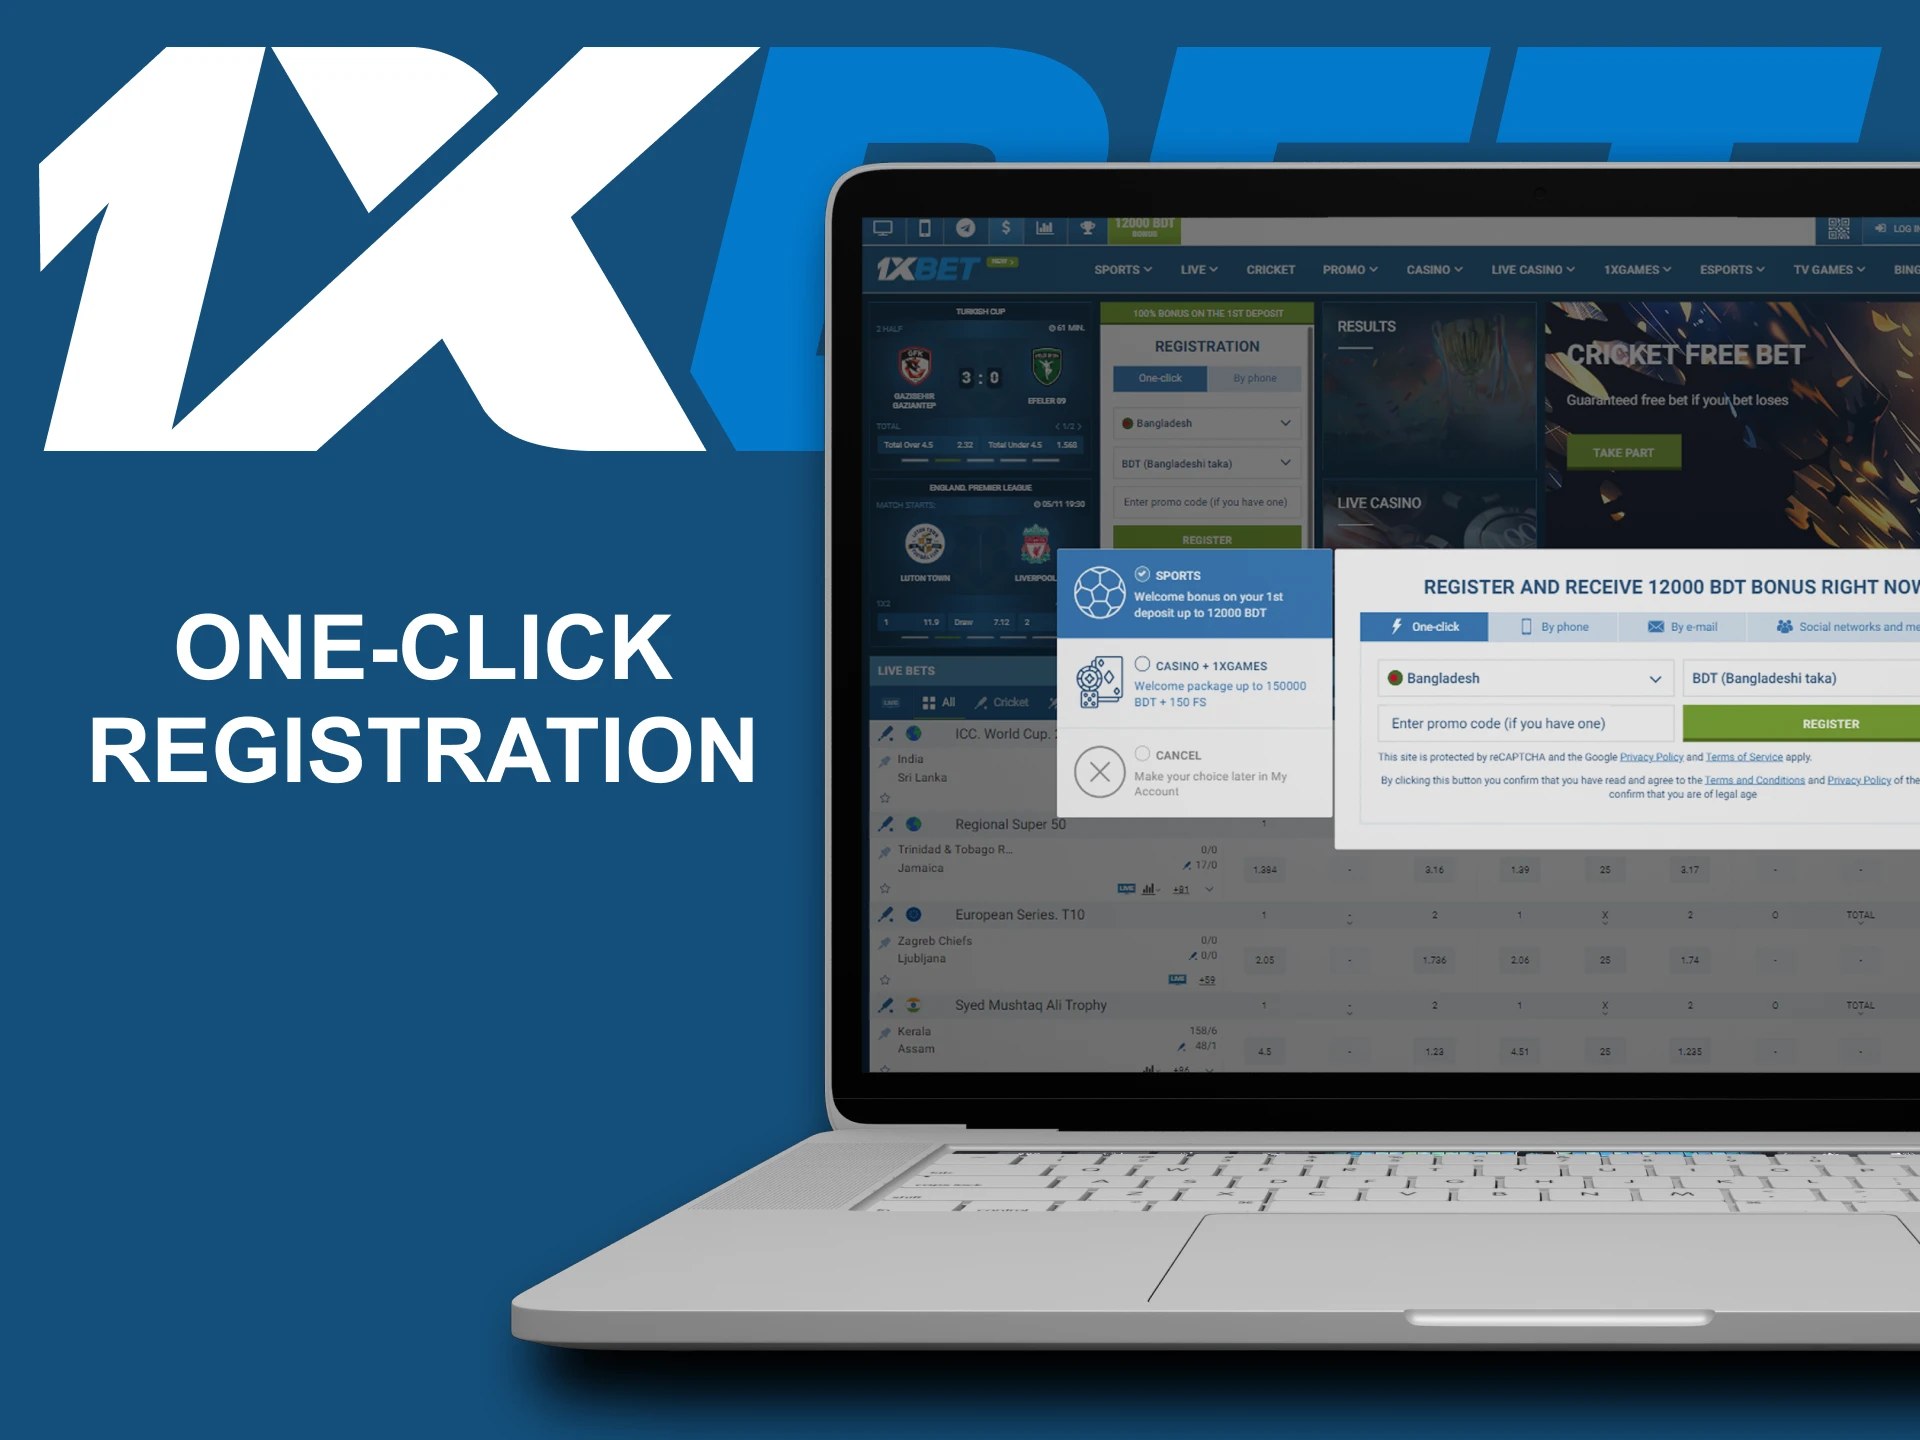 One-click is the simplest way to create an account at 1xBet.